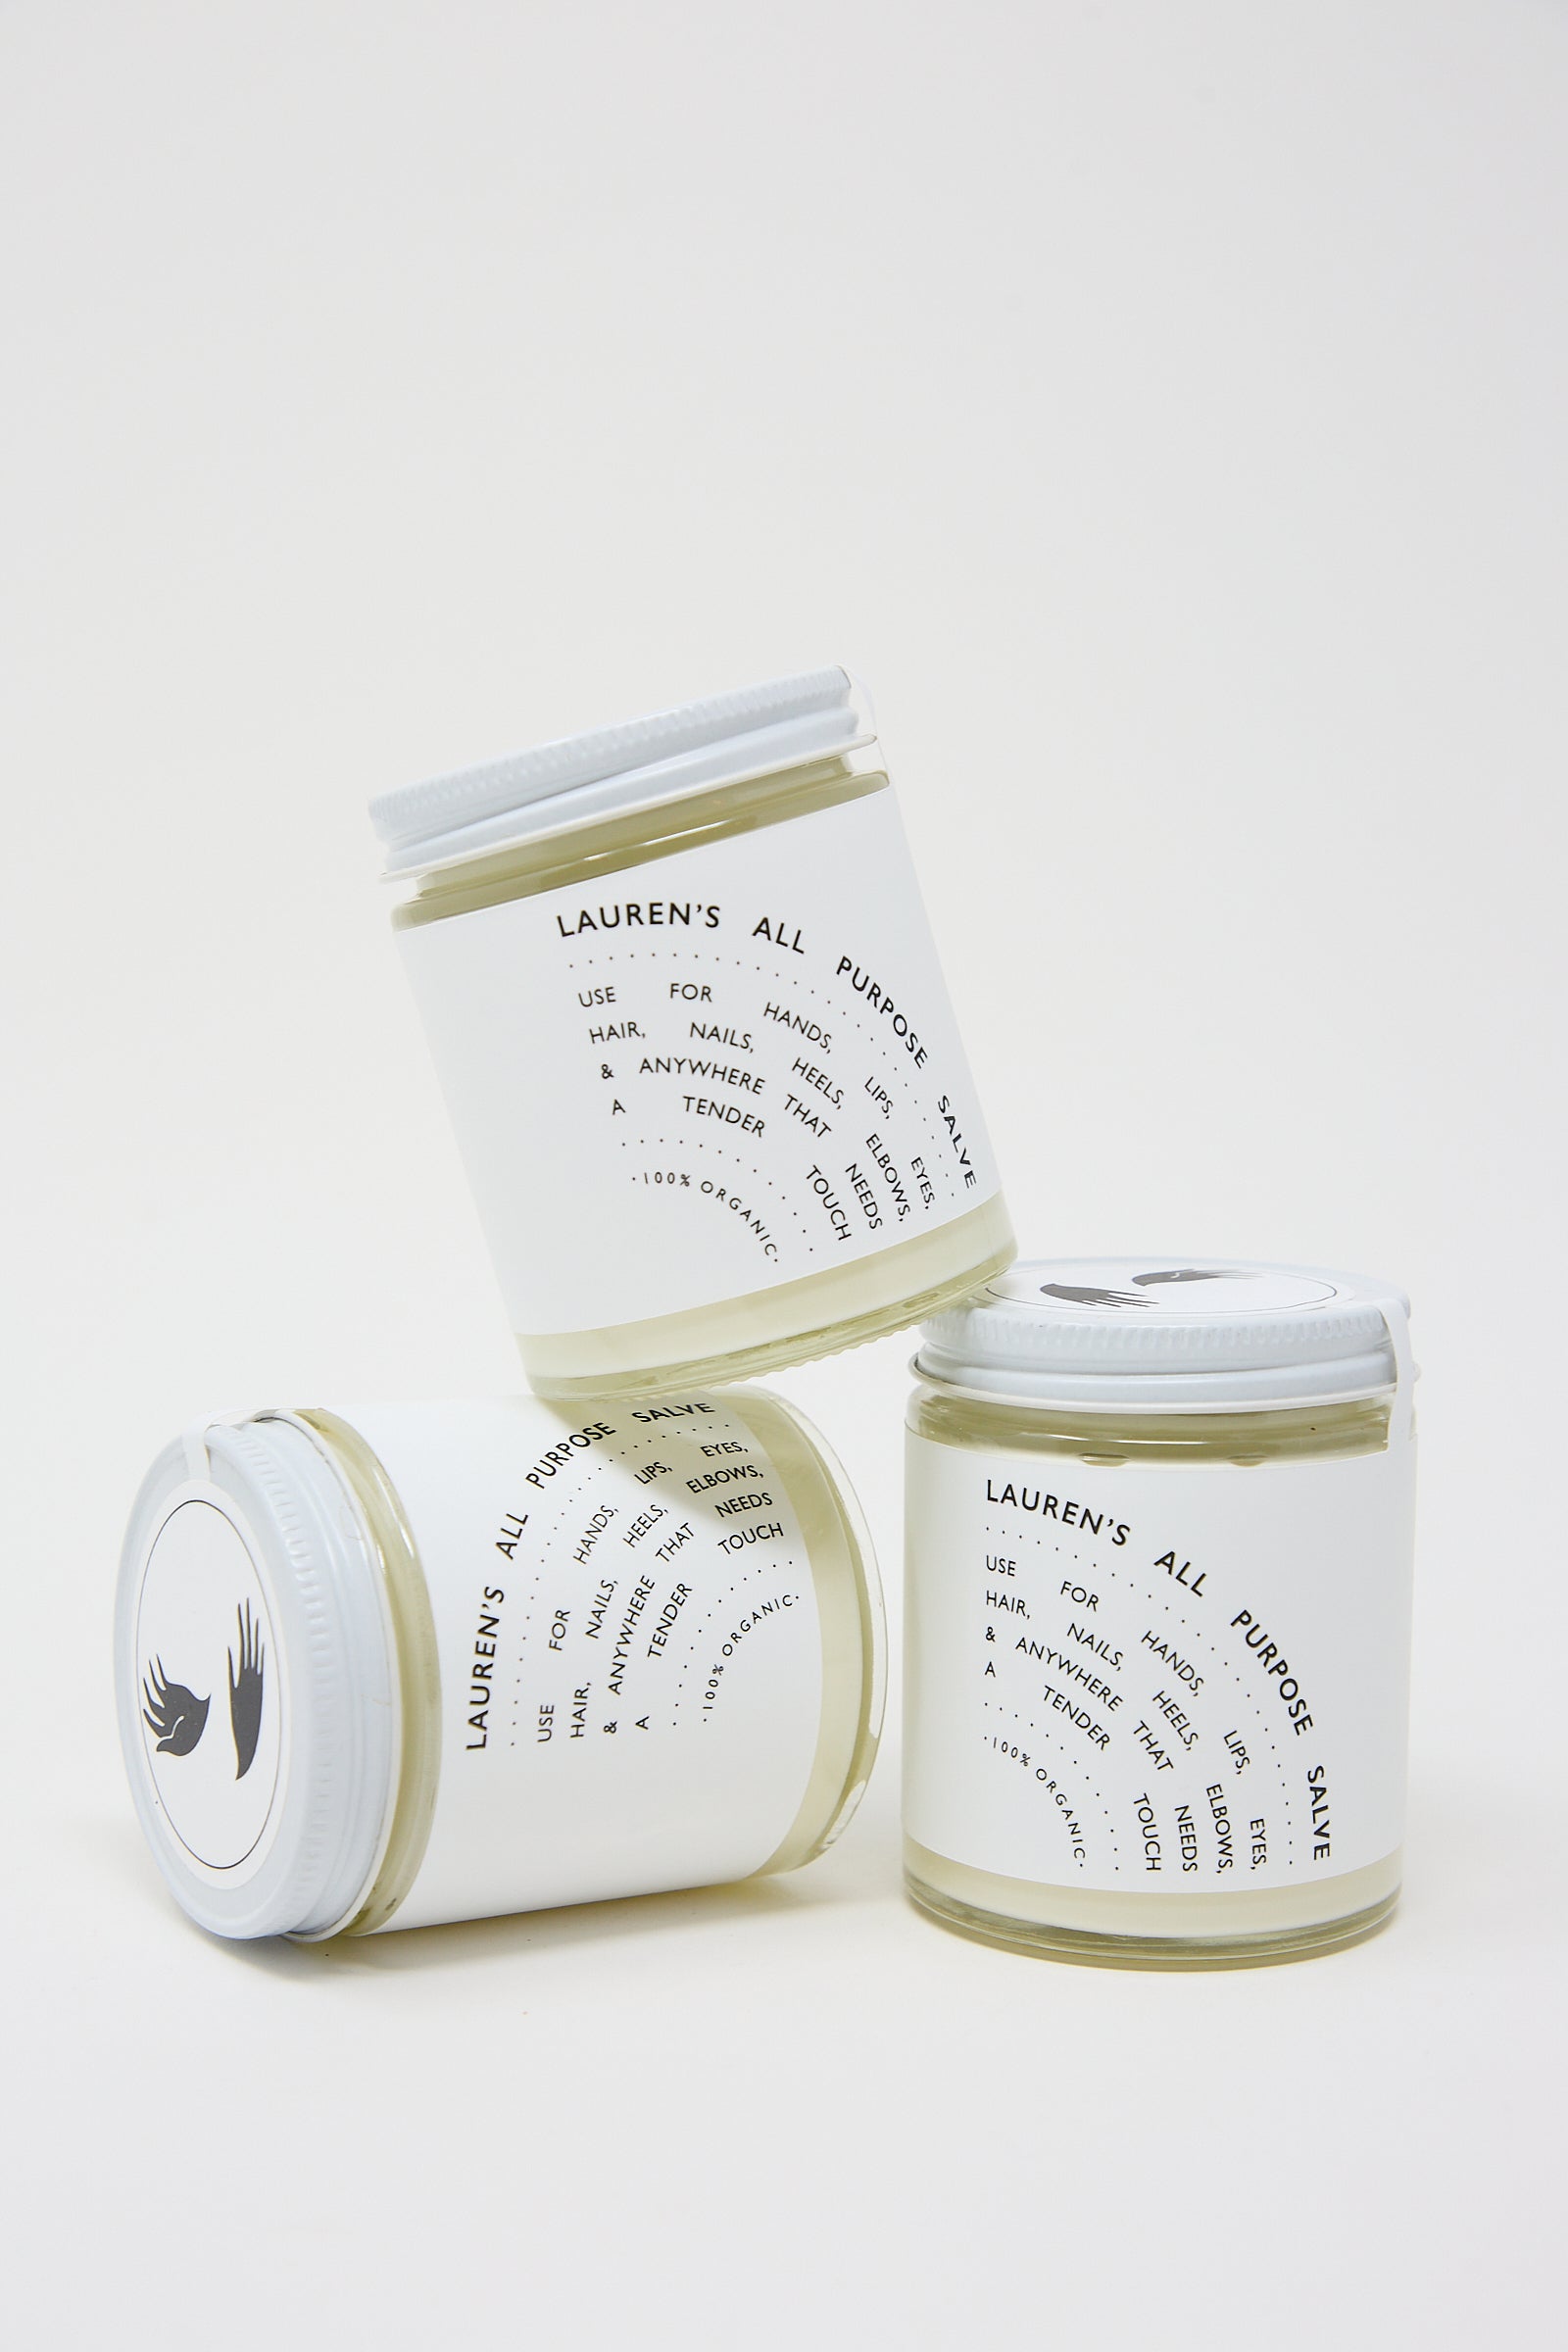 Three jars of "Lauren's All Purpose" salve with labels displaying organic ingredients and usage instructions, arranged against a white background.